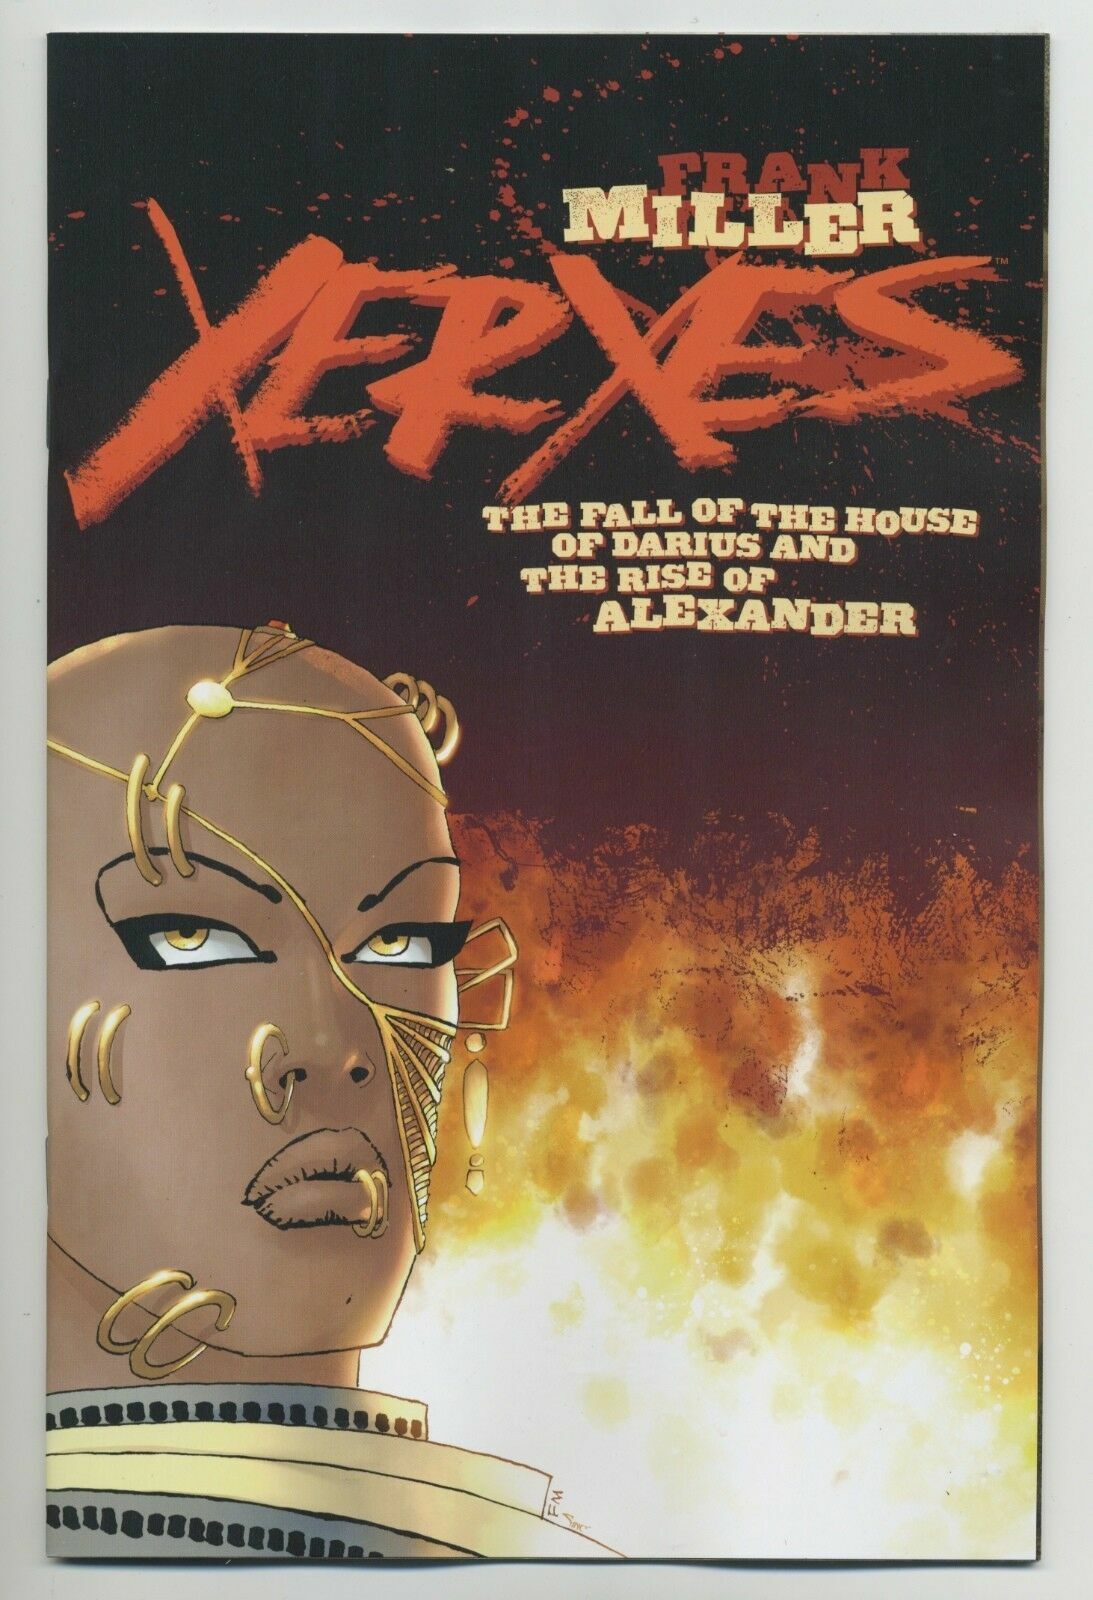 XERXES: THE FALL OF THE HOUSE OF DARIUS AND THE RISE OF ALEXANDER 1-5 NM Miller